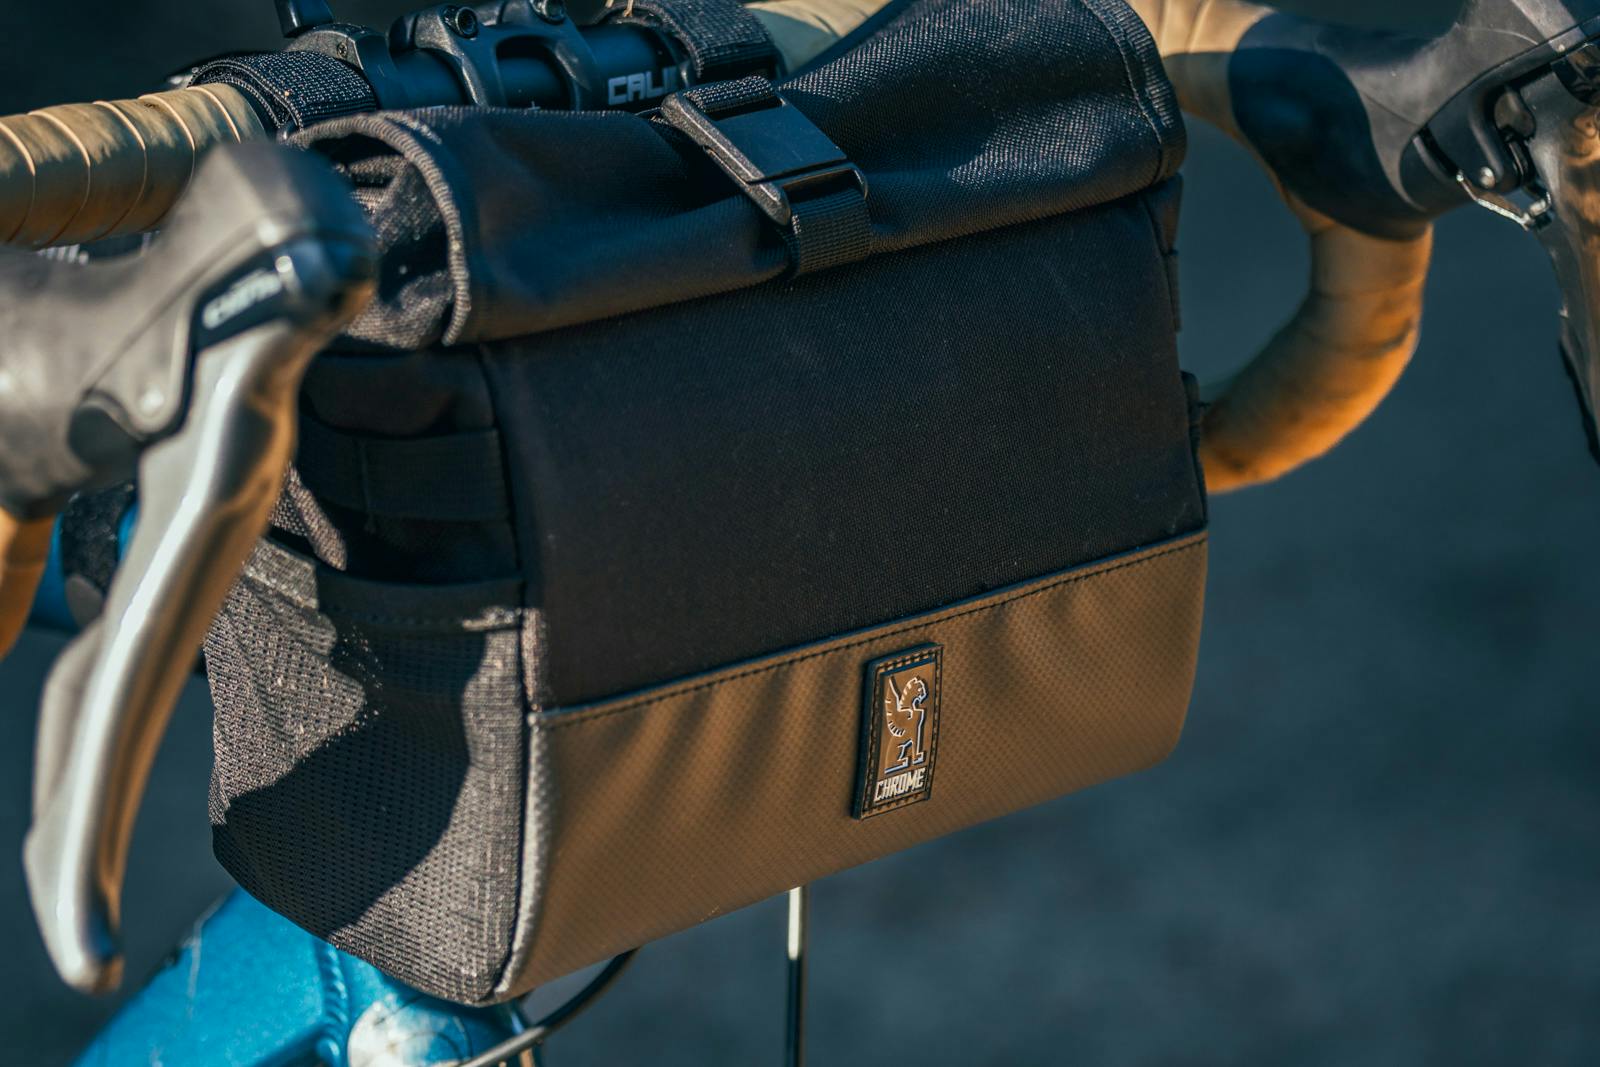 Chrome Industries Doubletrack Handlebar Sling Review